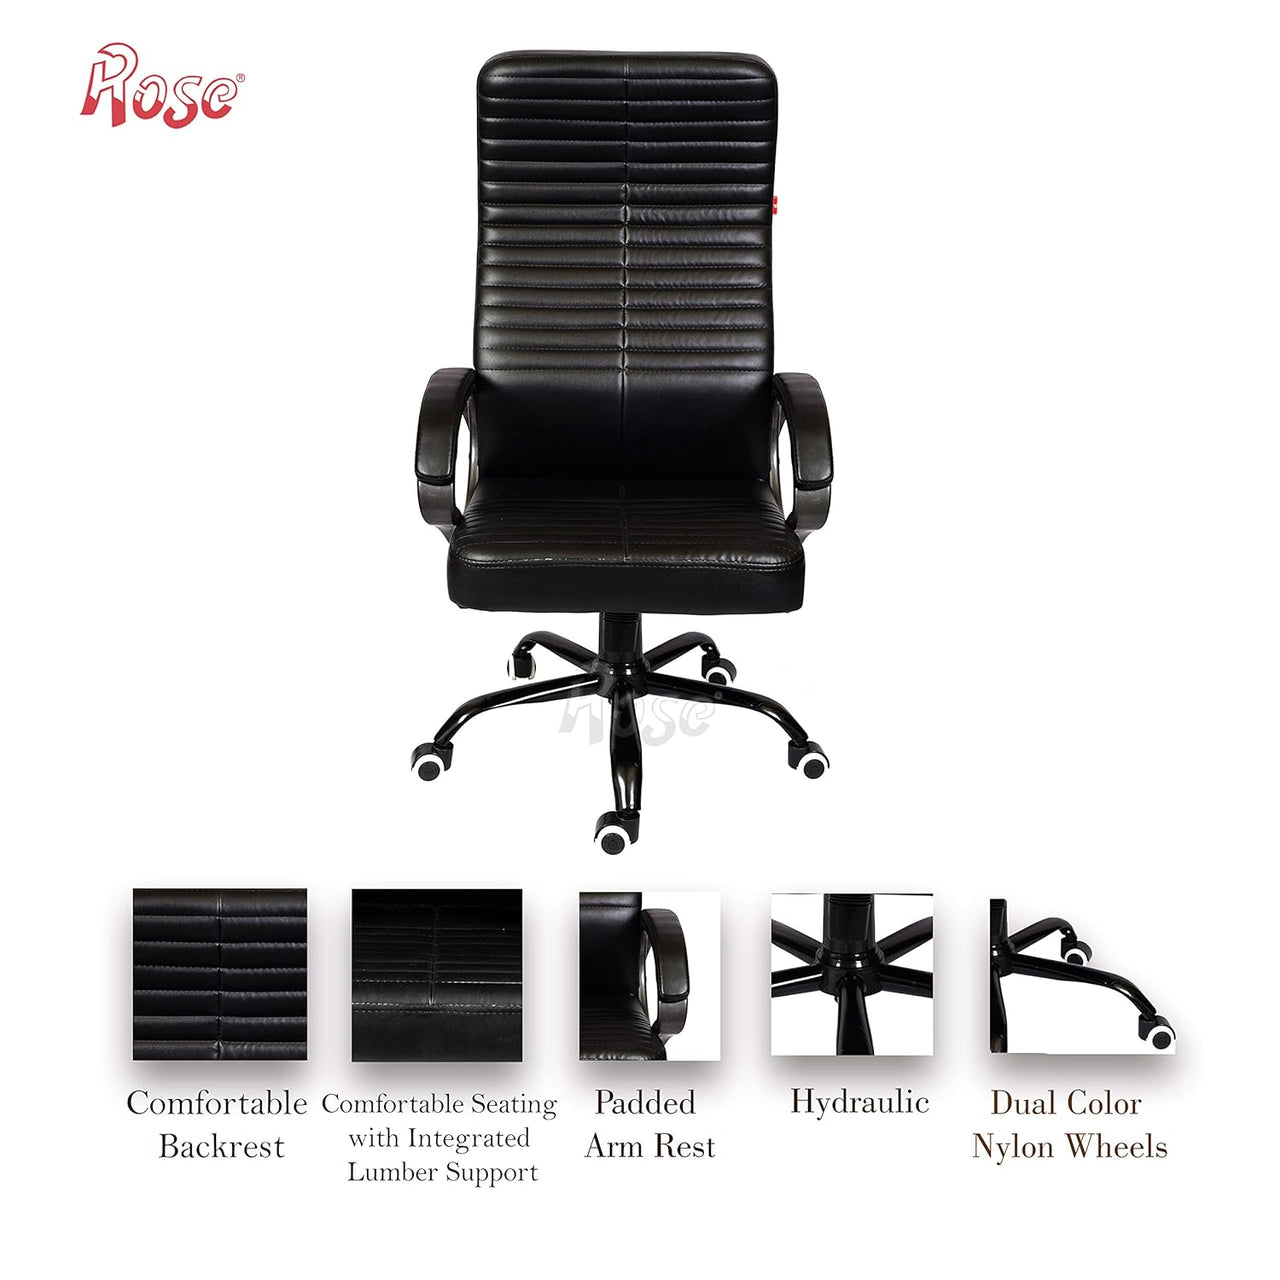 Roll 3 Executive High Back Leatherette Chair (Black)